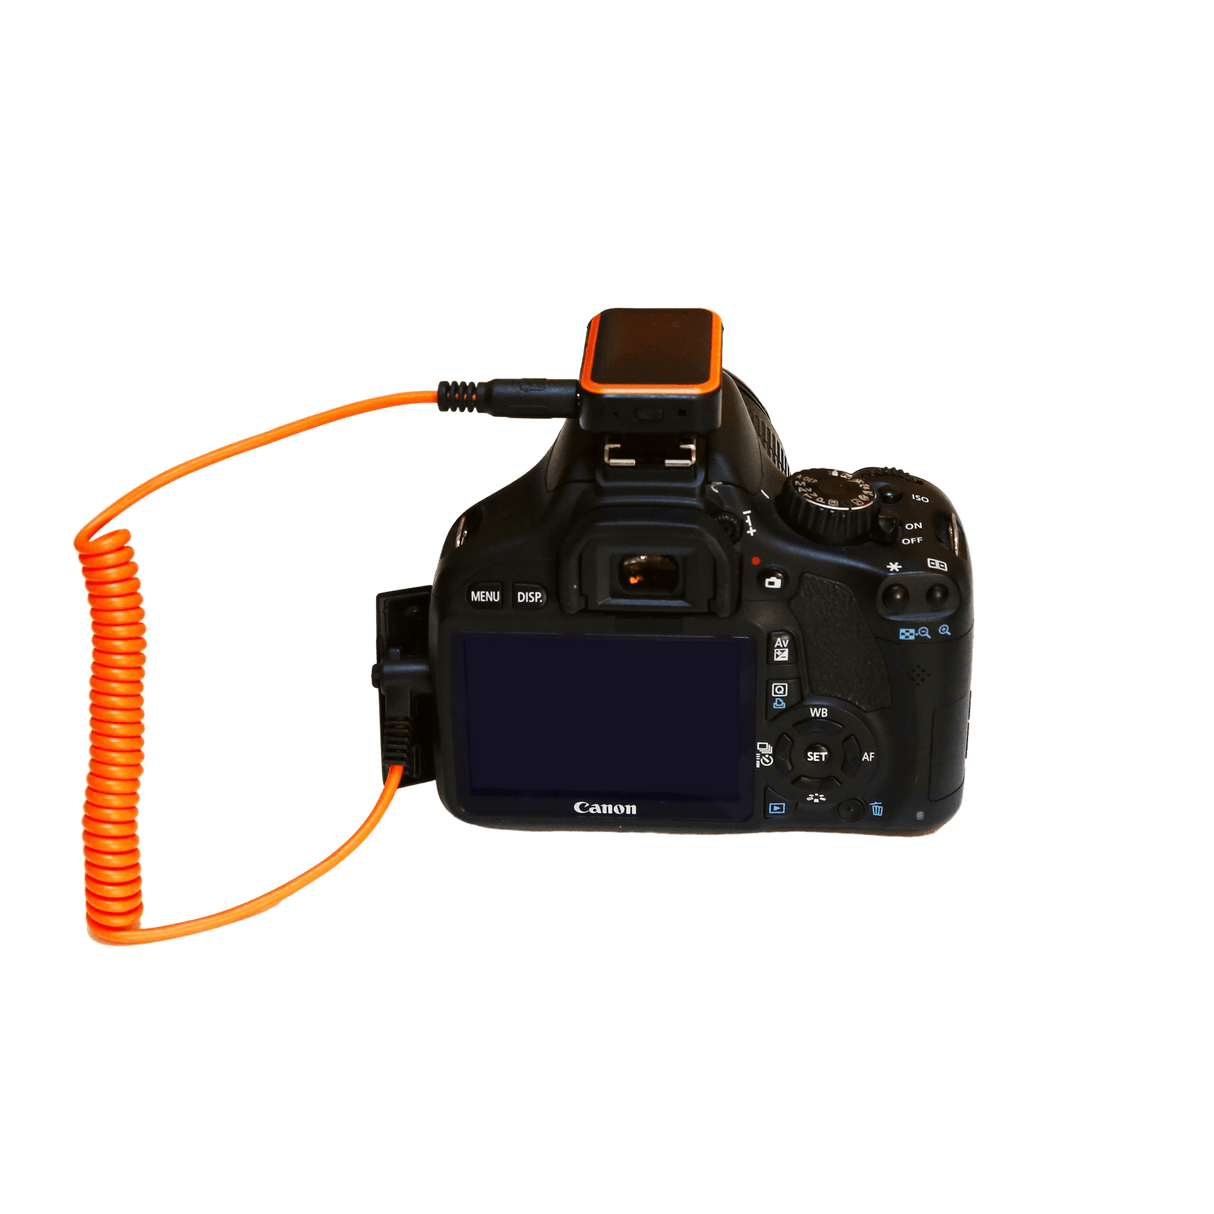 Rollei Video MIOPS Remote Plus inkl. USB Kabel